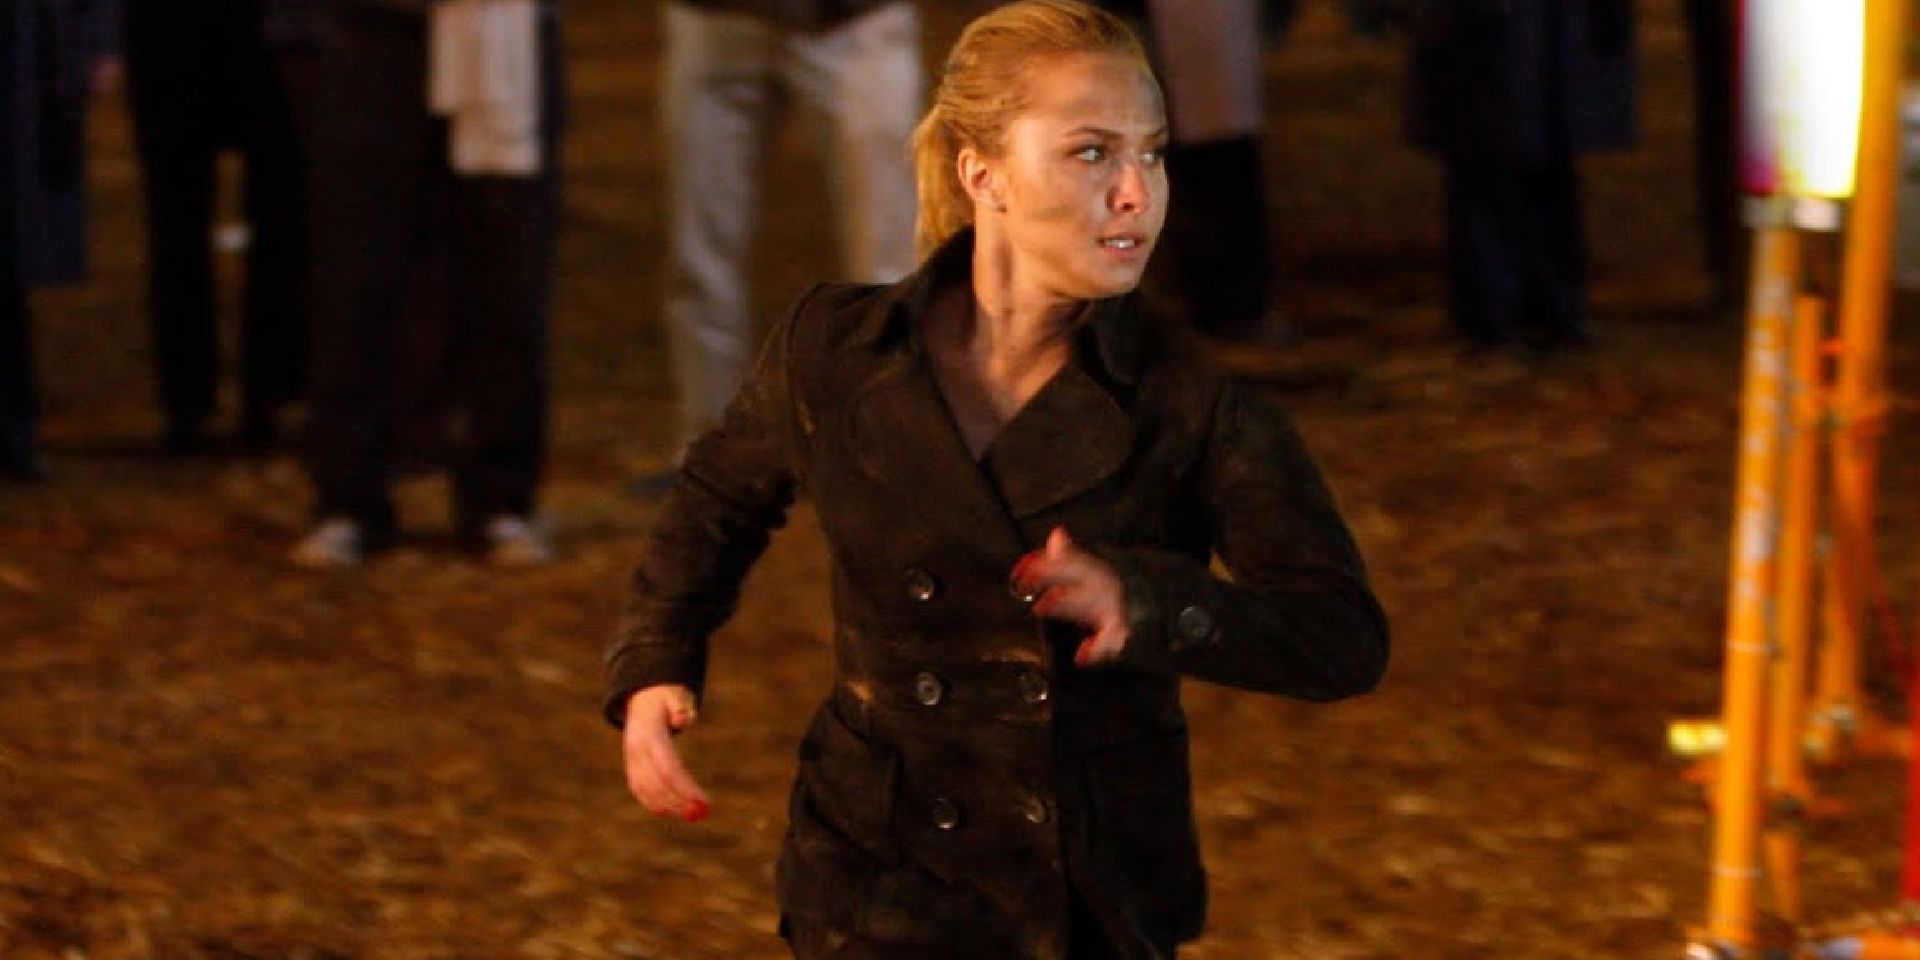 Claire runs in the Heroes Finale.